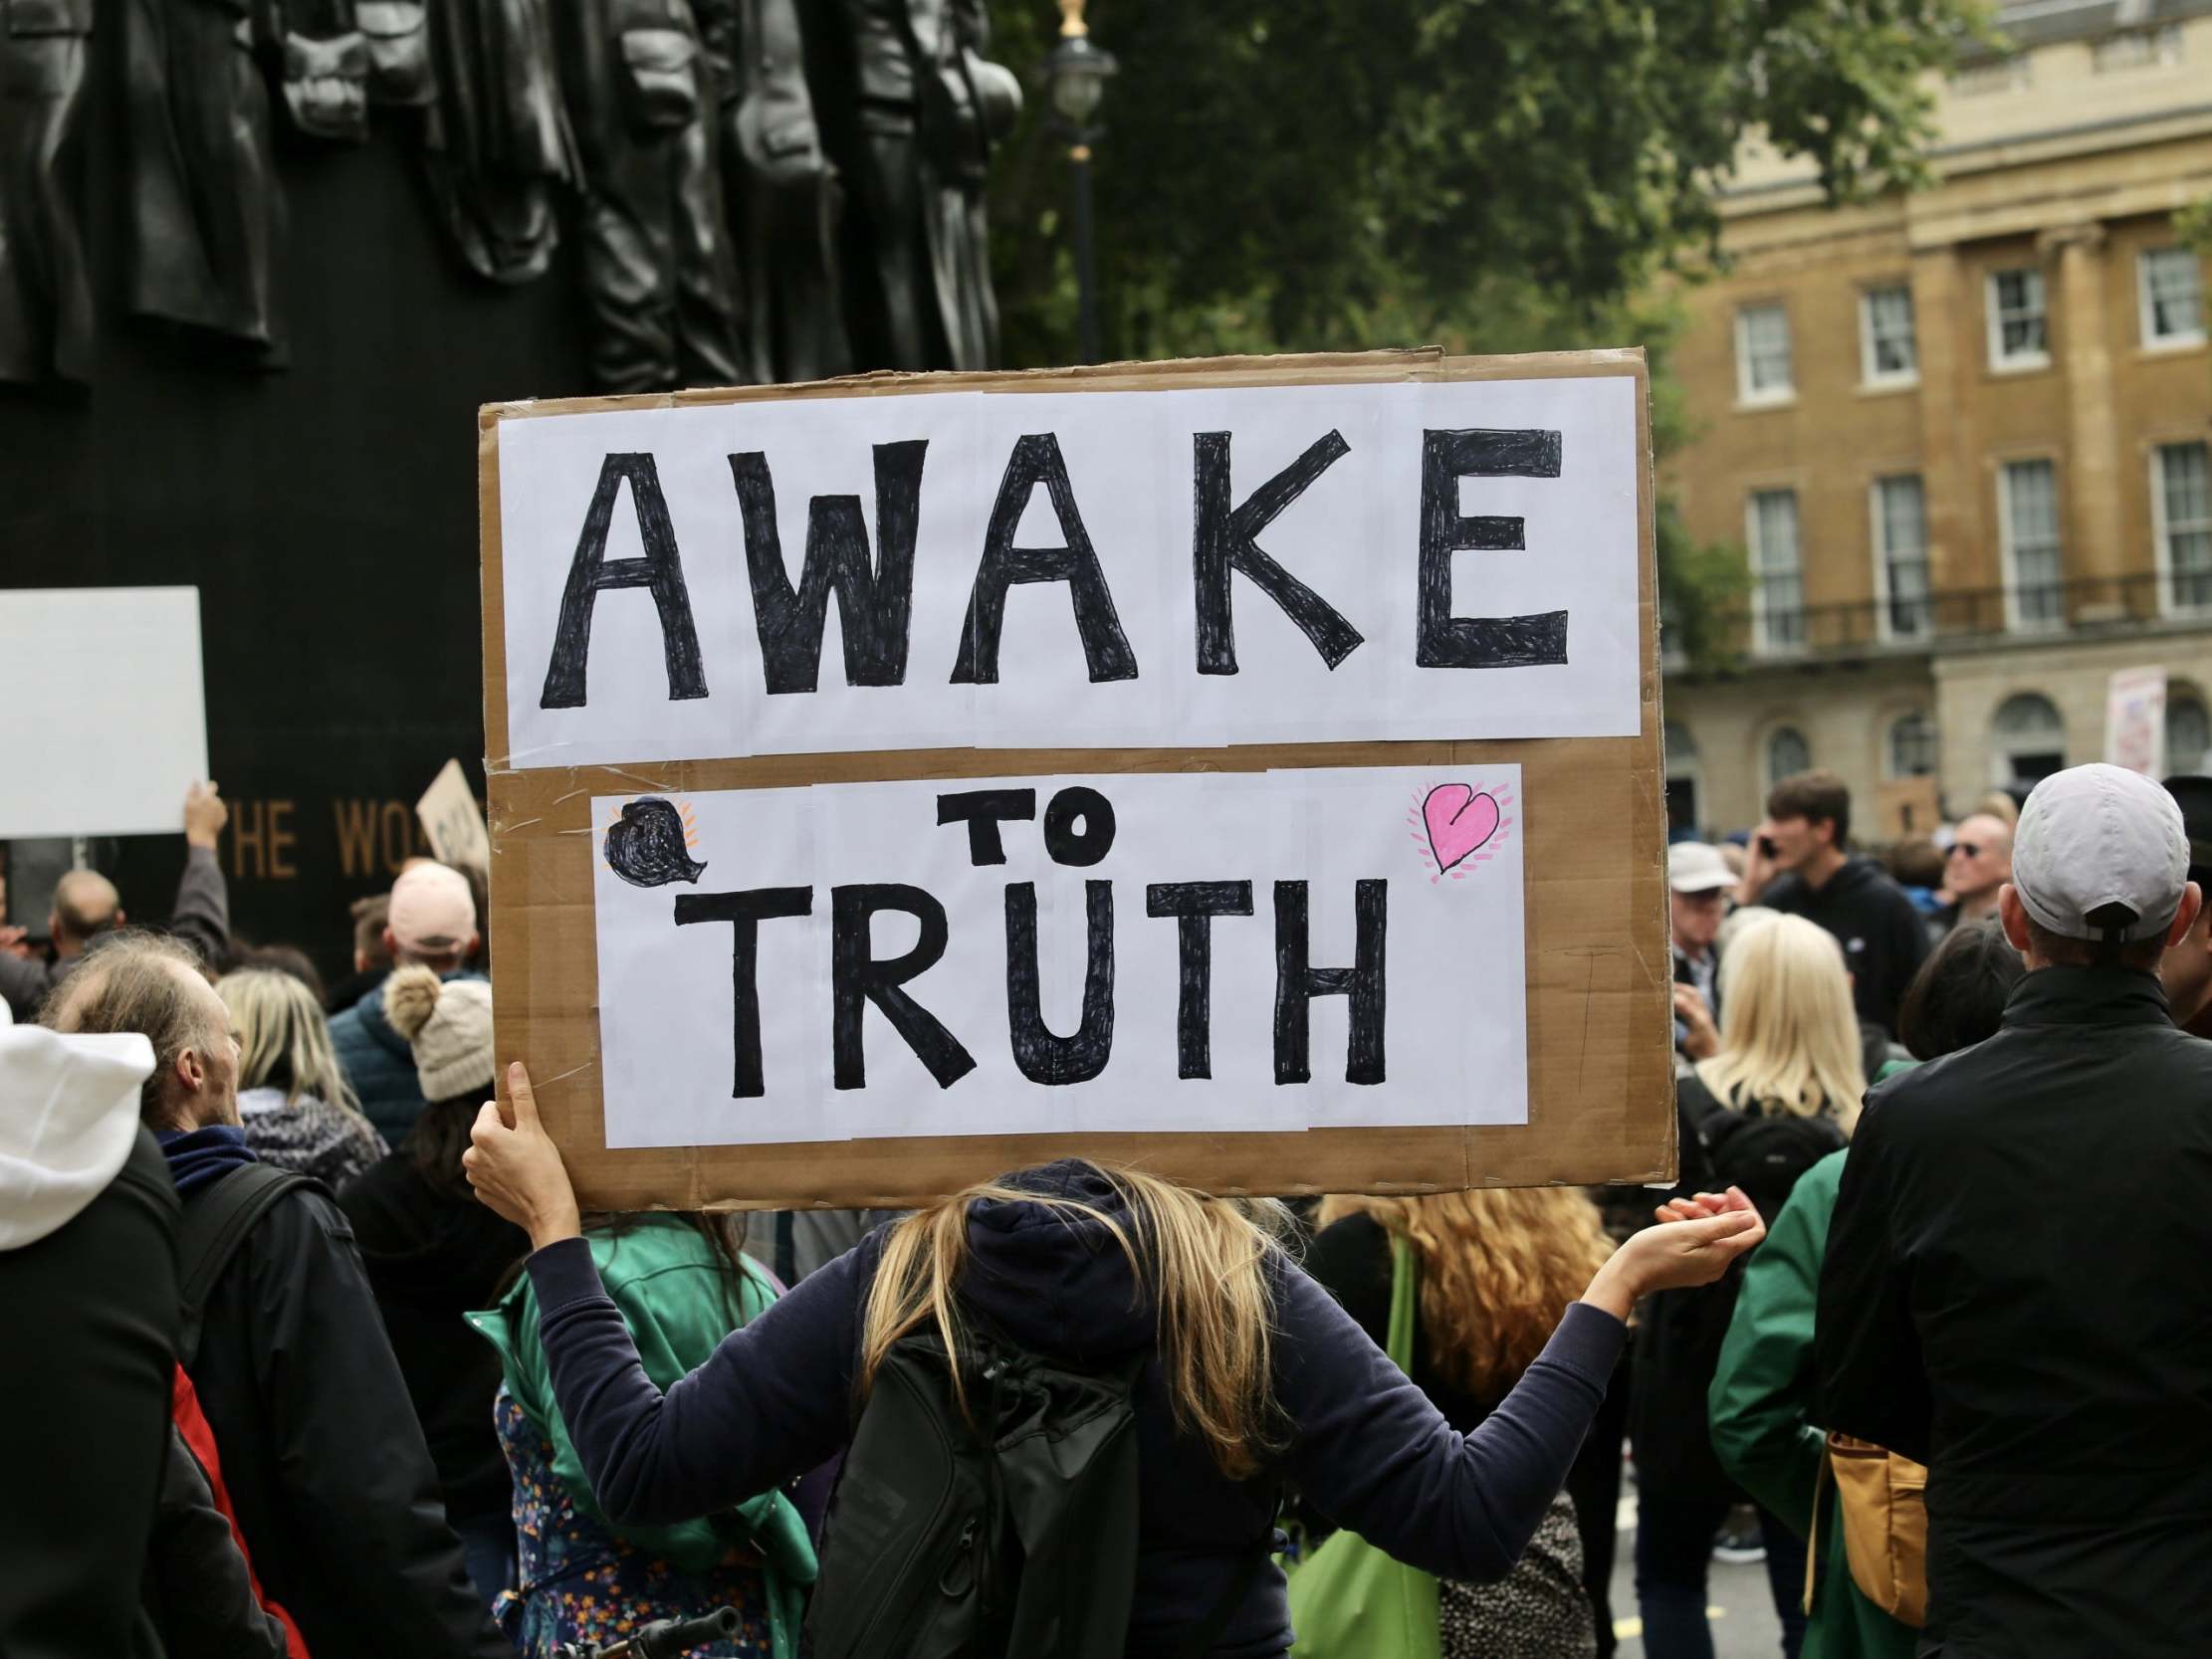 People gather at a protest dominated by conspiracy theorists in Trafalgar Square, London, on 29 August 2020